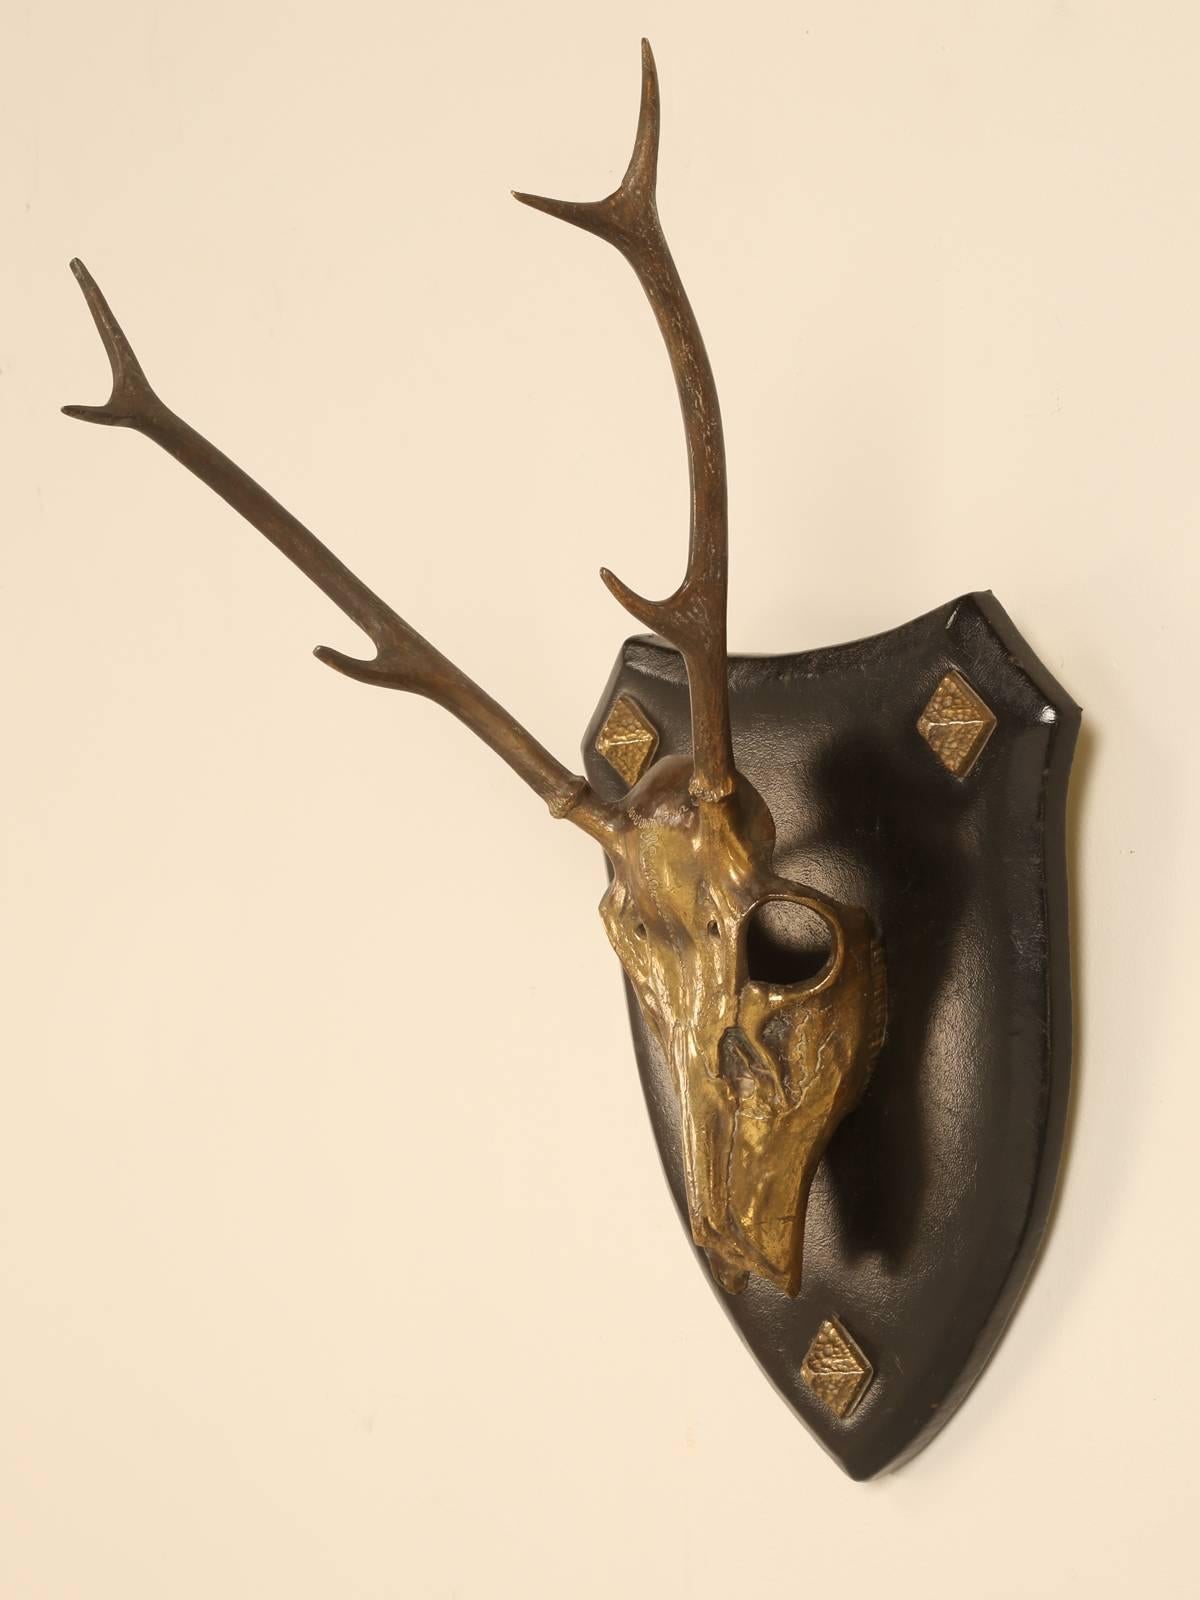 Artfully sculpted stag head was made in France probably during the 1950s and was cast from solid brass and then hand-polished before mounting on a leather covered mount. The antlers had a patina applied in order to darken and have a contrast with